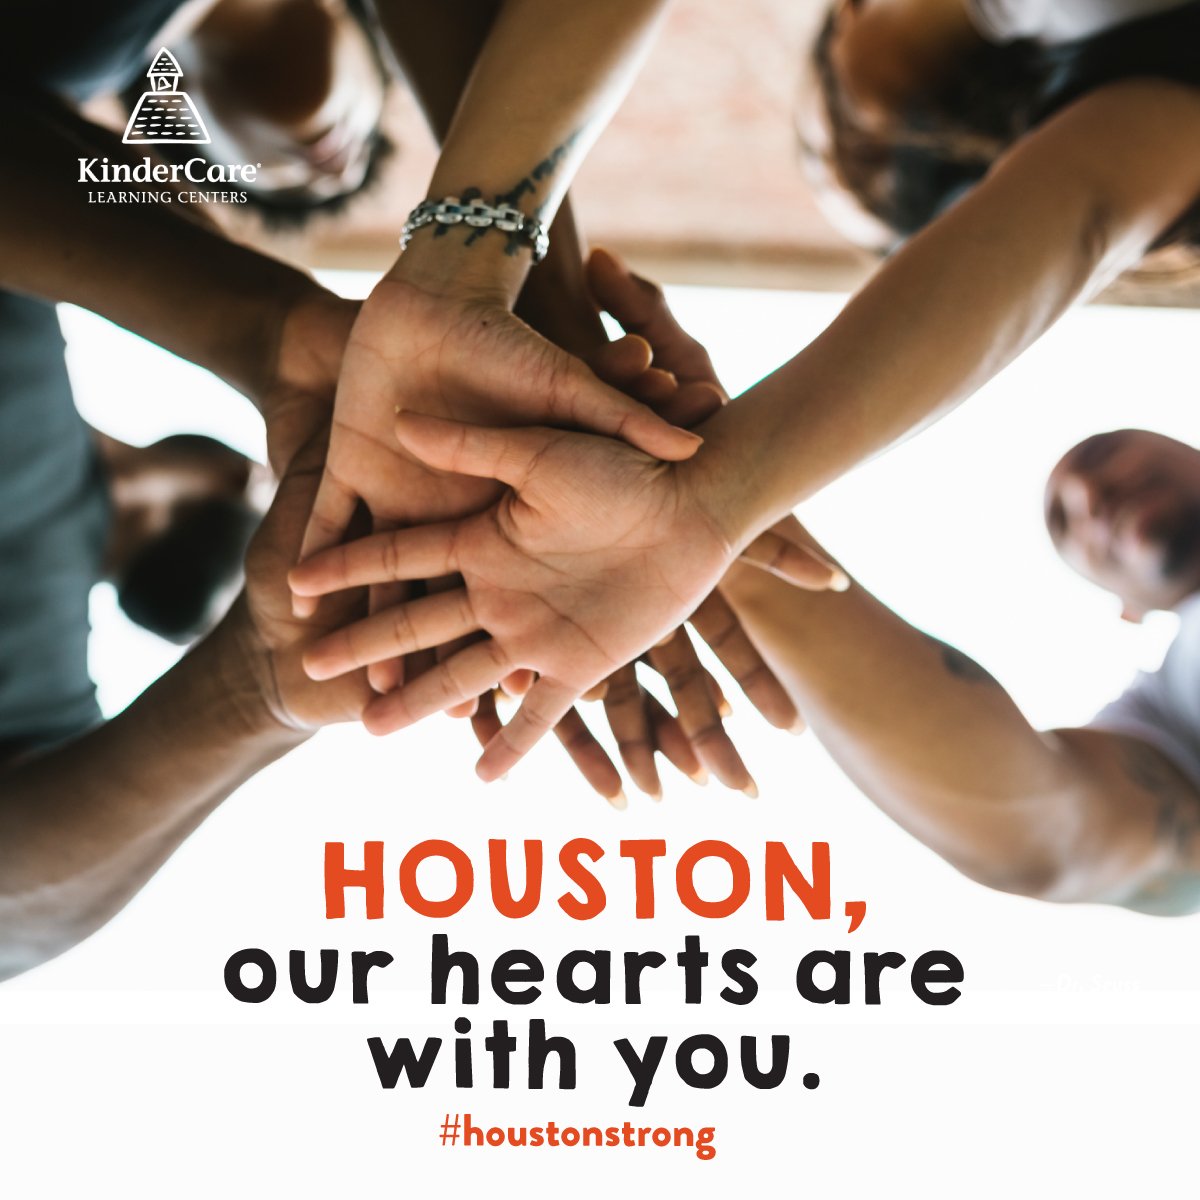 Our ❤'s are with those affected by #HurricaneHarvey. Families, updates are on kindercare.com center pages or call us: 888-525-2780.